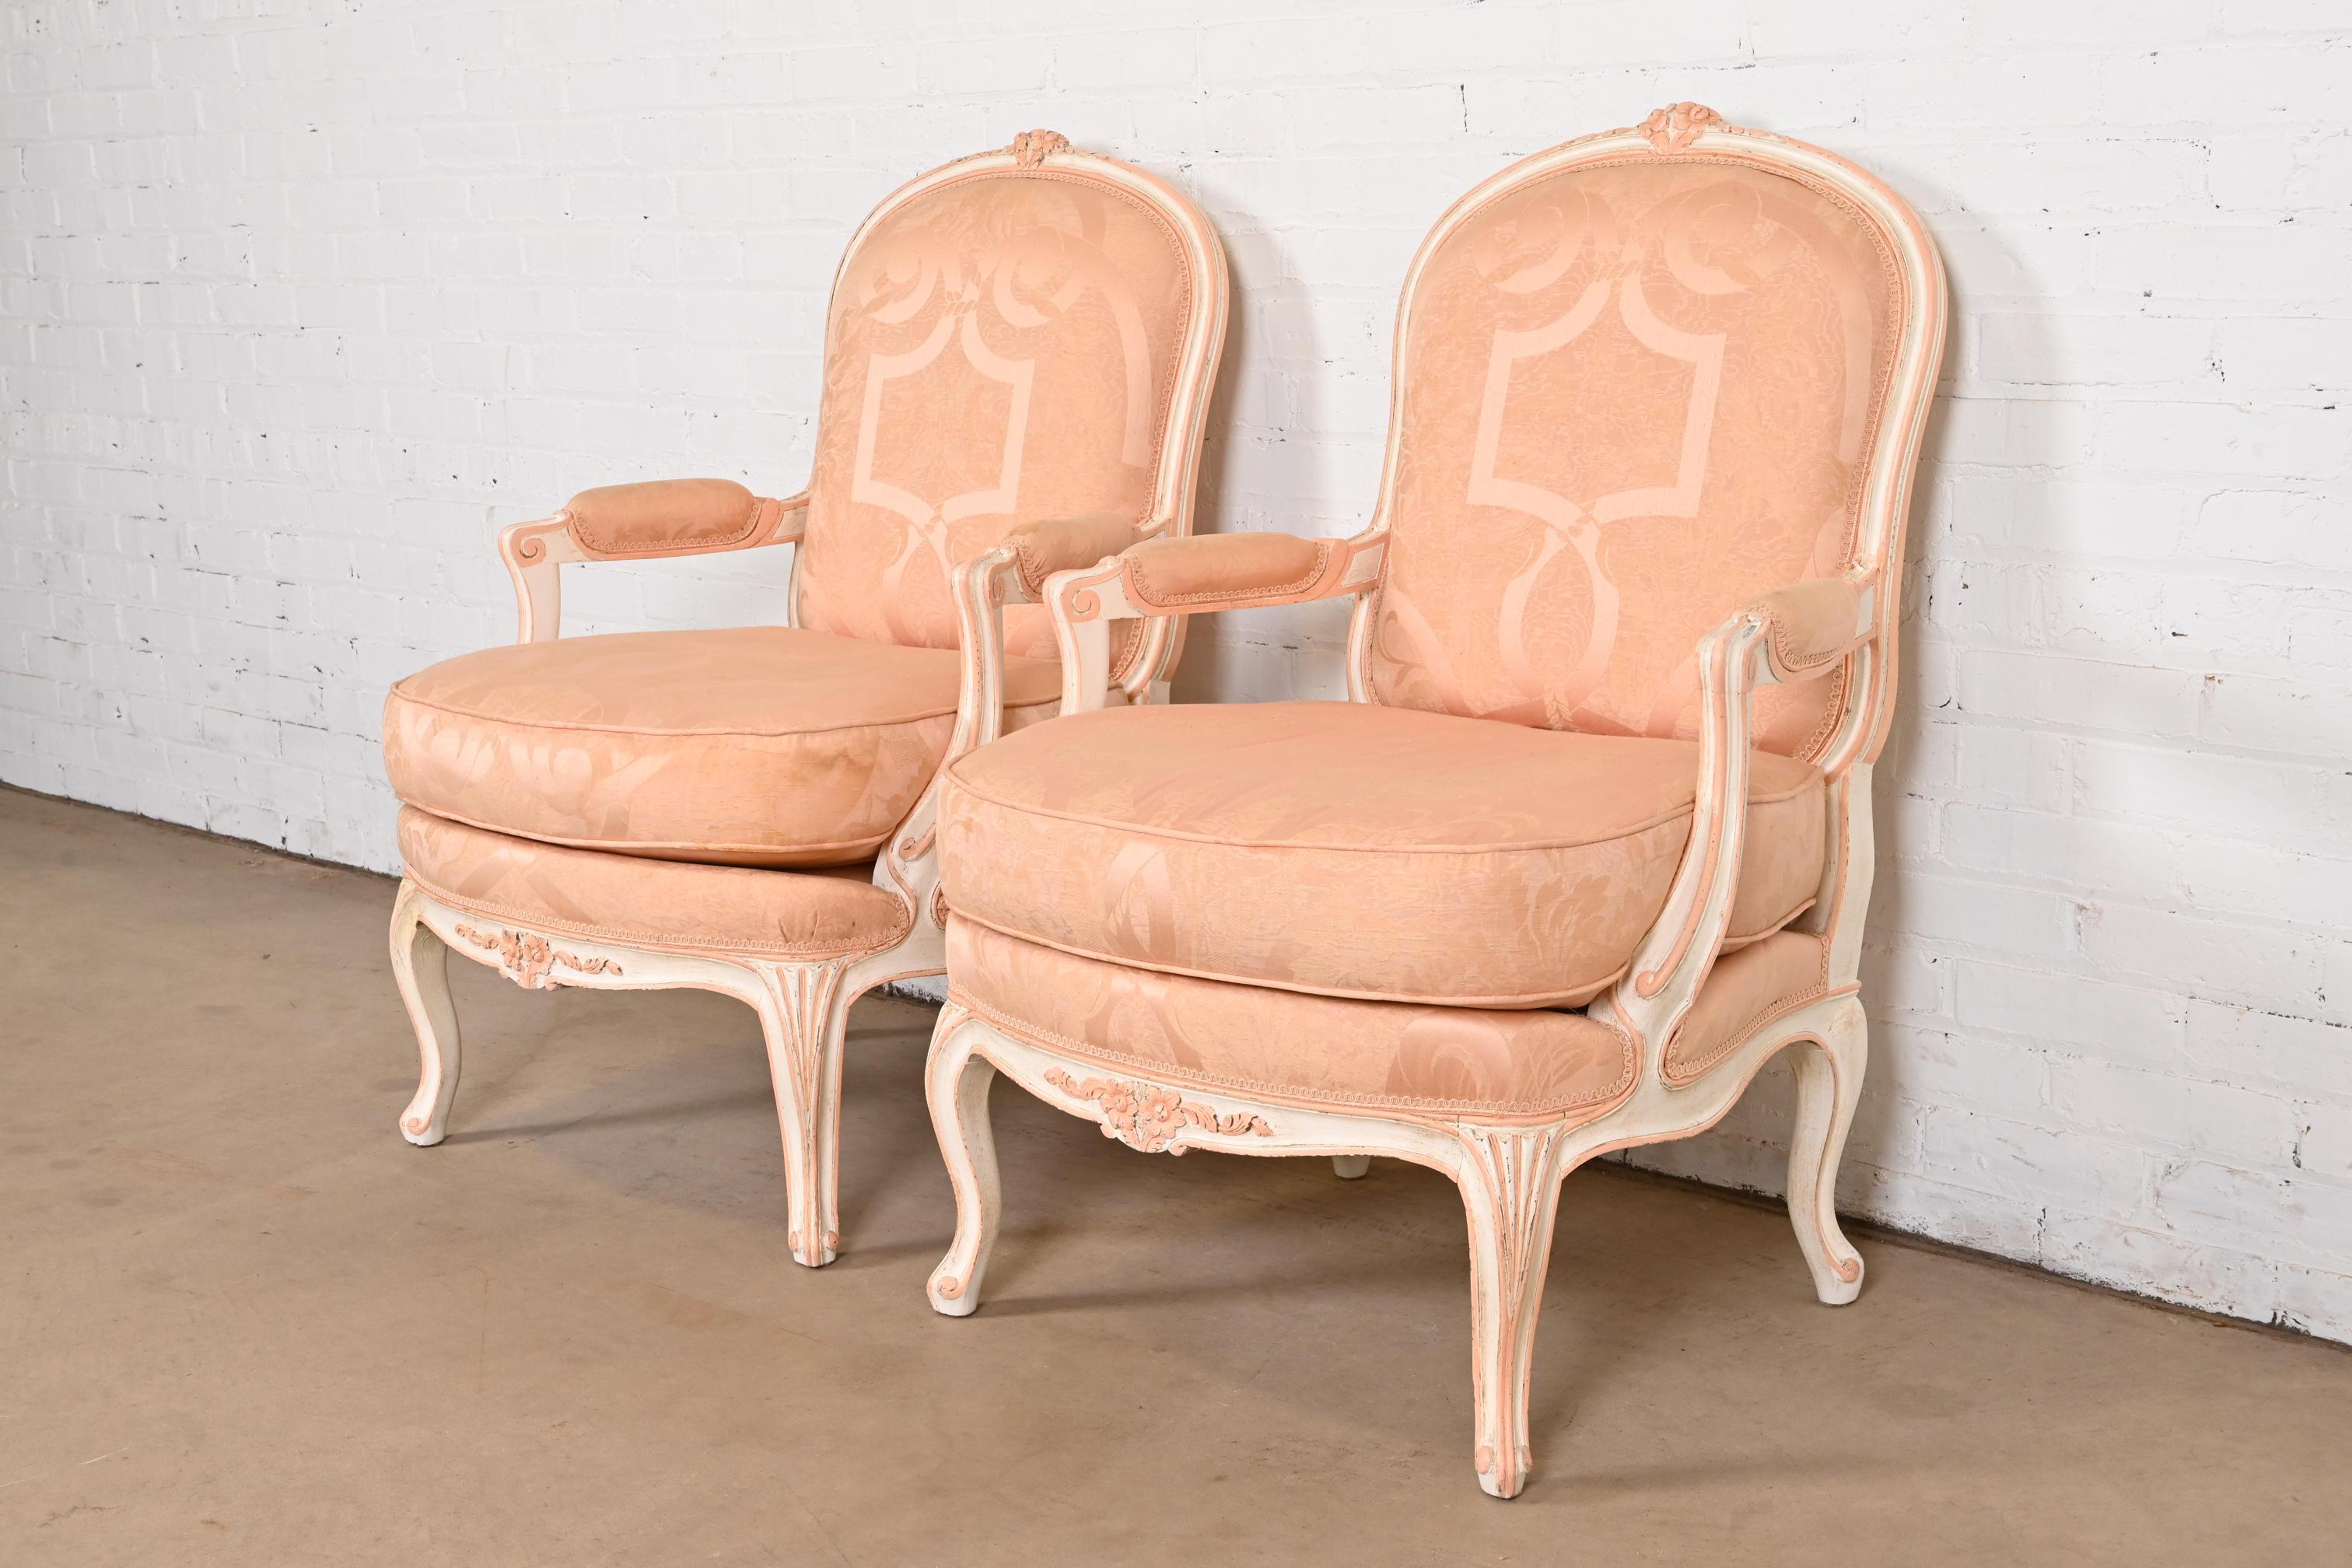 French Provincial Louis XV Carved Painted Walnut Fauteuils, Pair For Sale 1